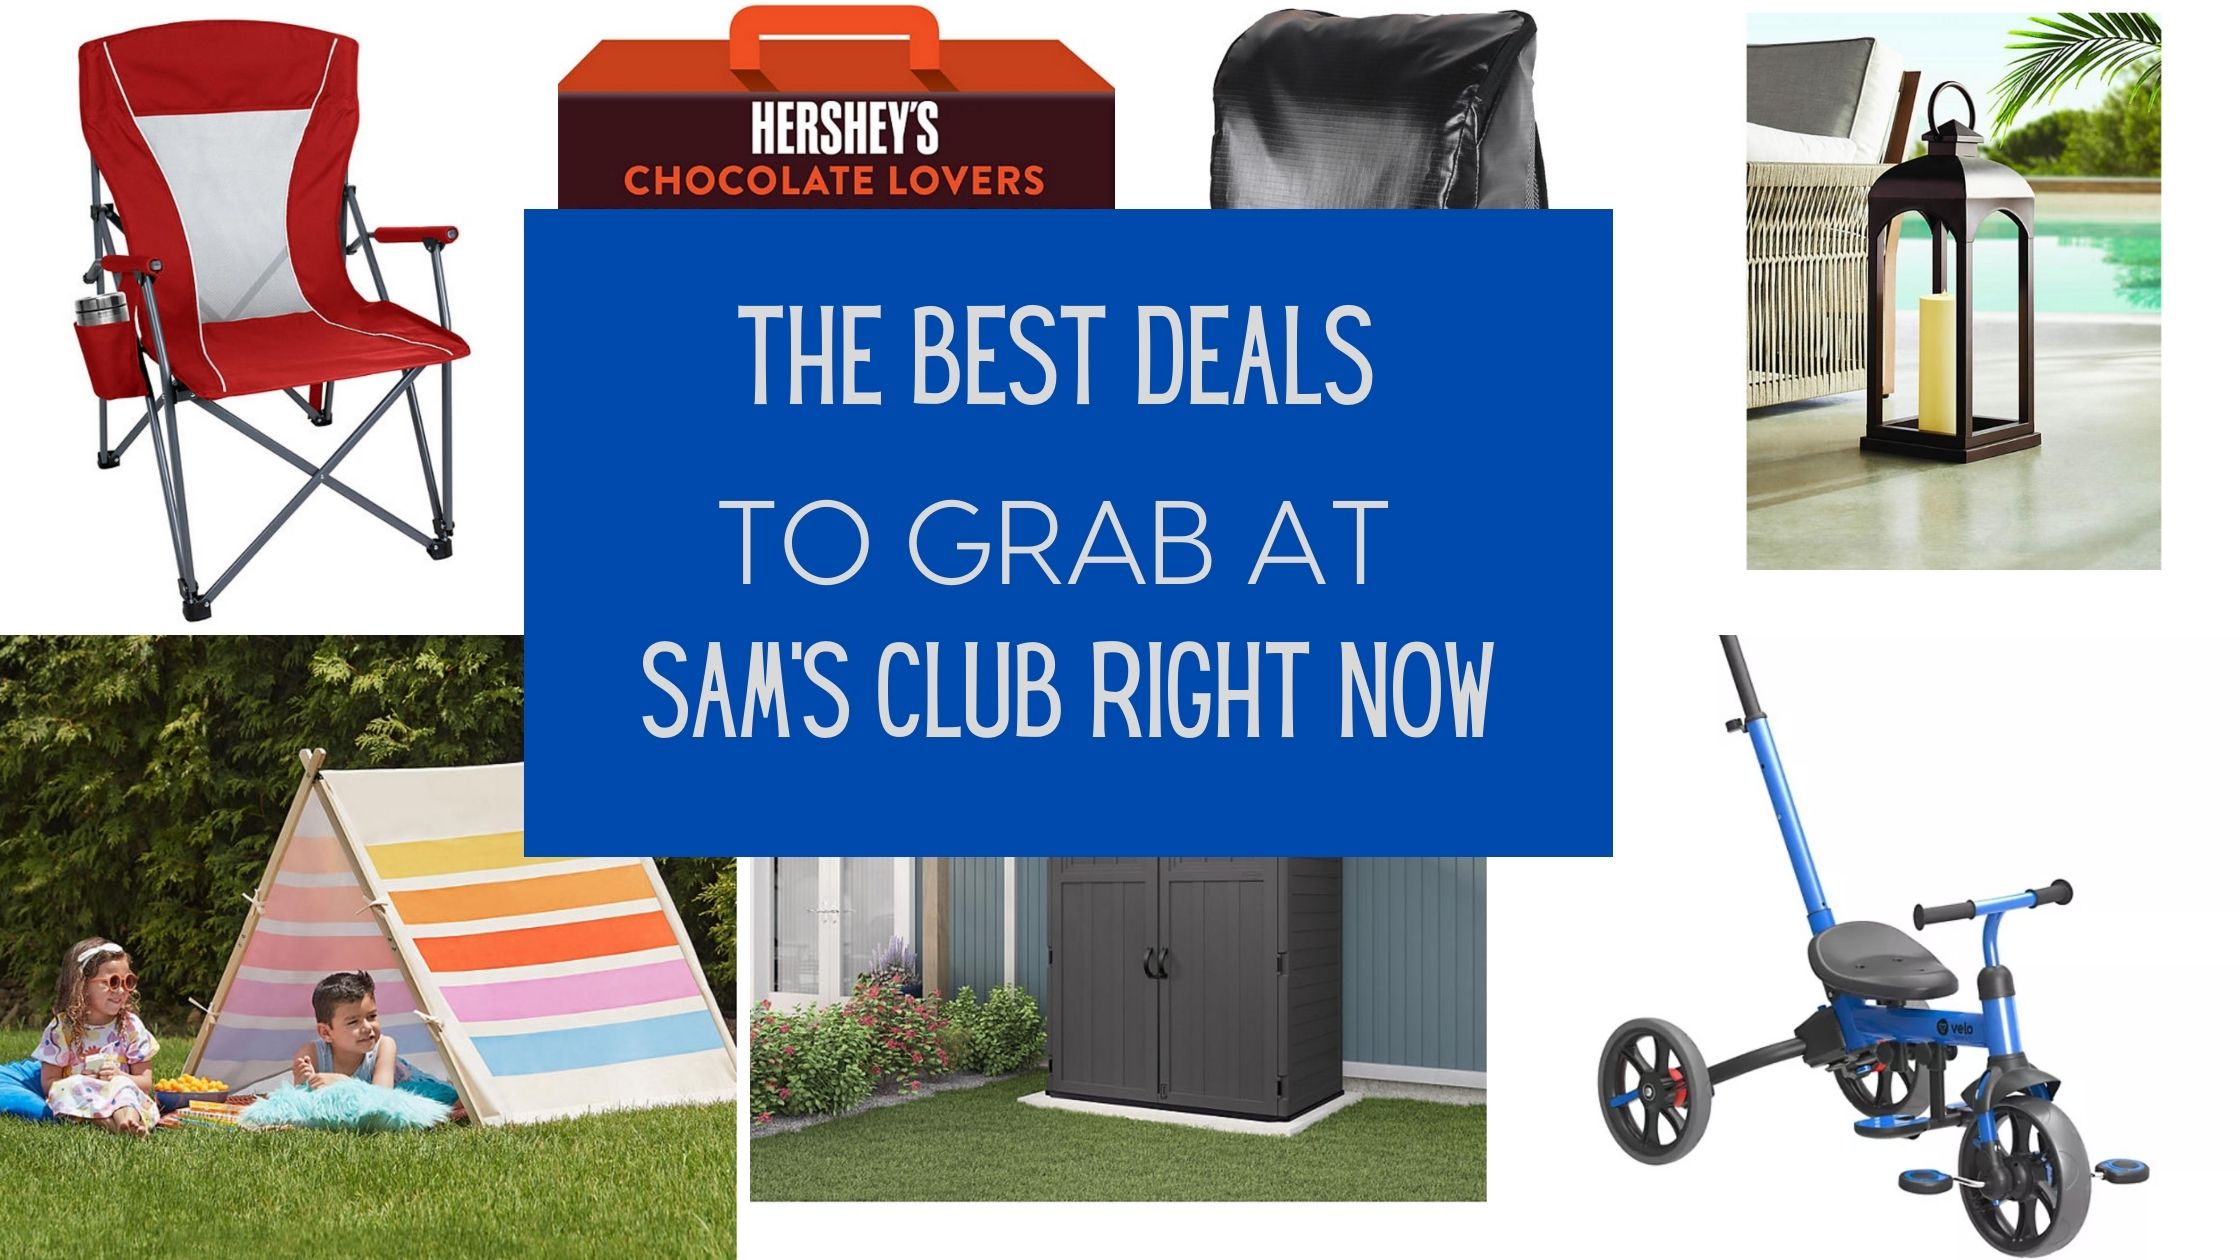 The Best Deals at Sam’s Club This Week